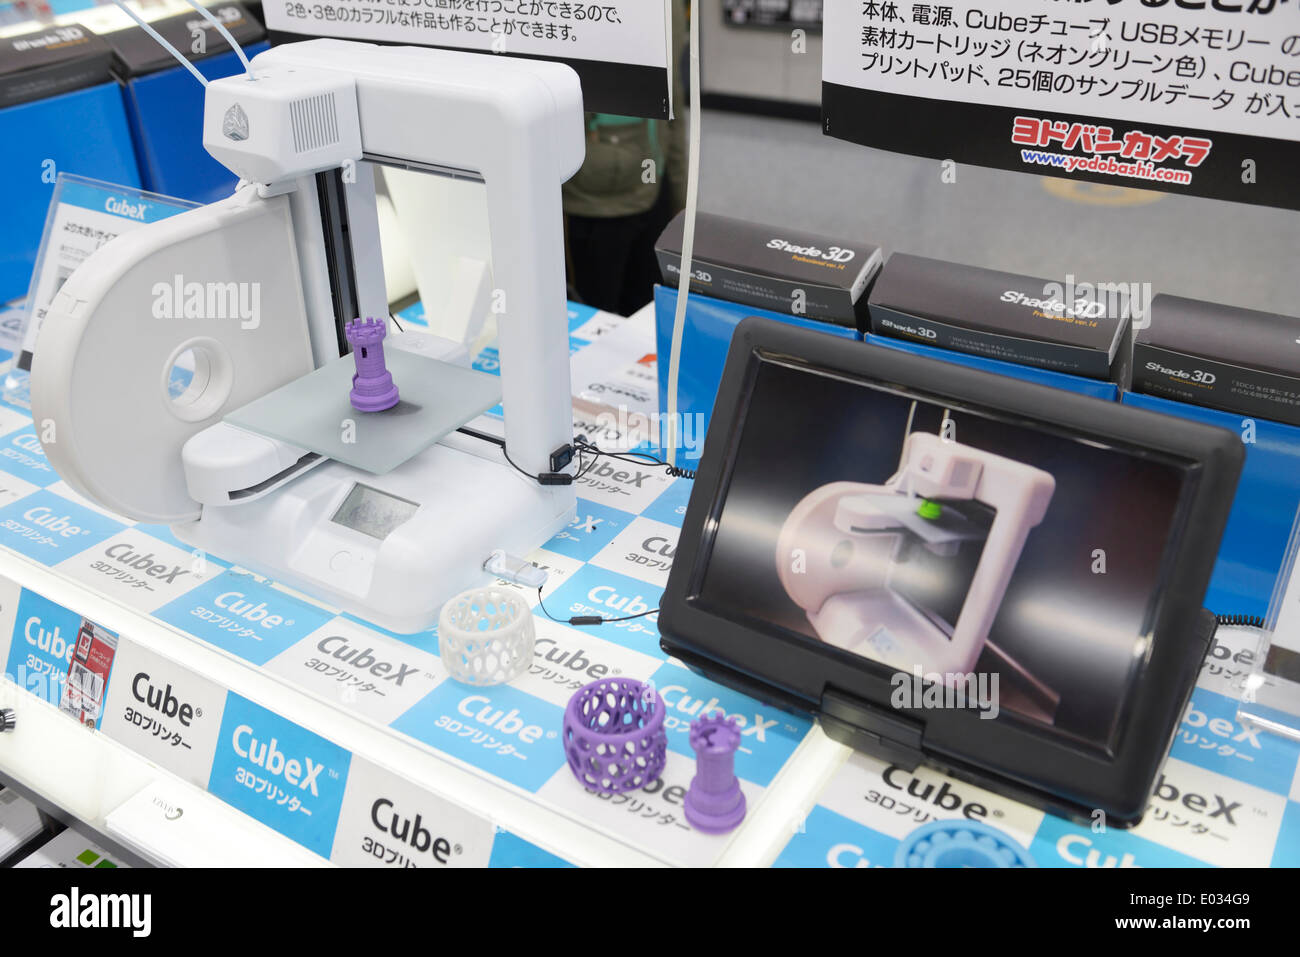 Cube 3D printer in a store in Japan Stock Photo - Alamy